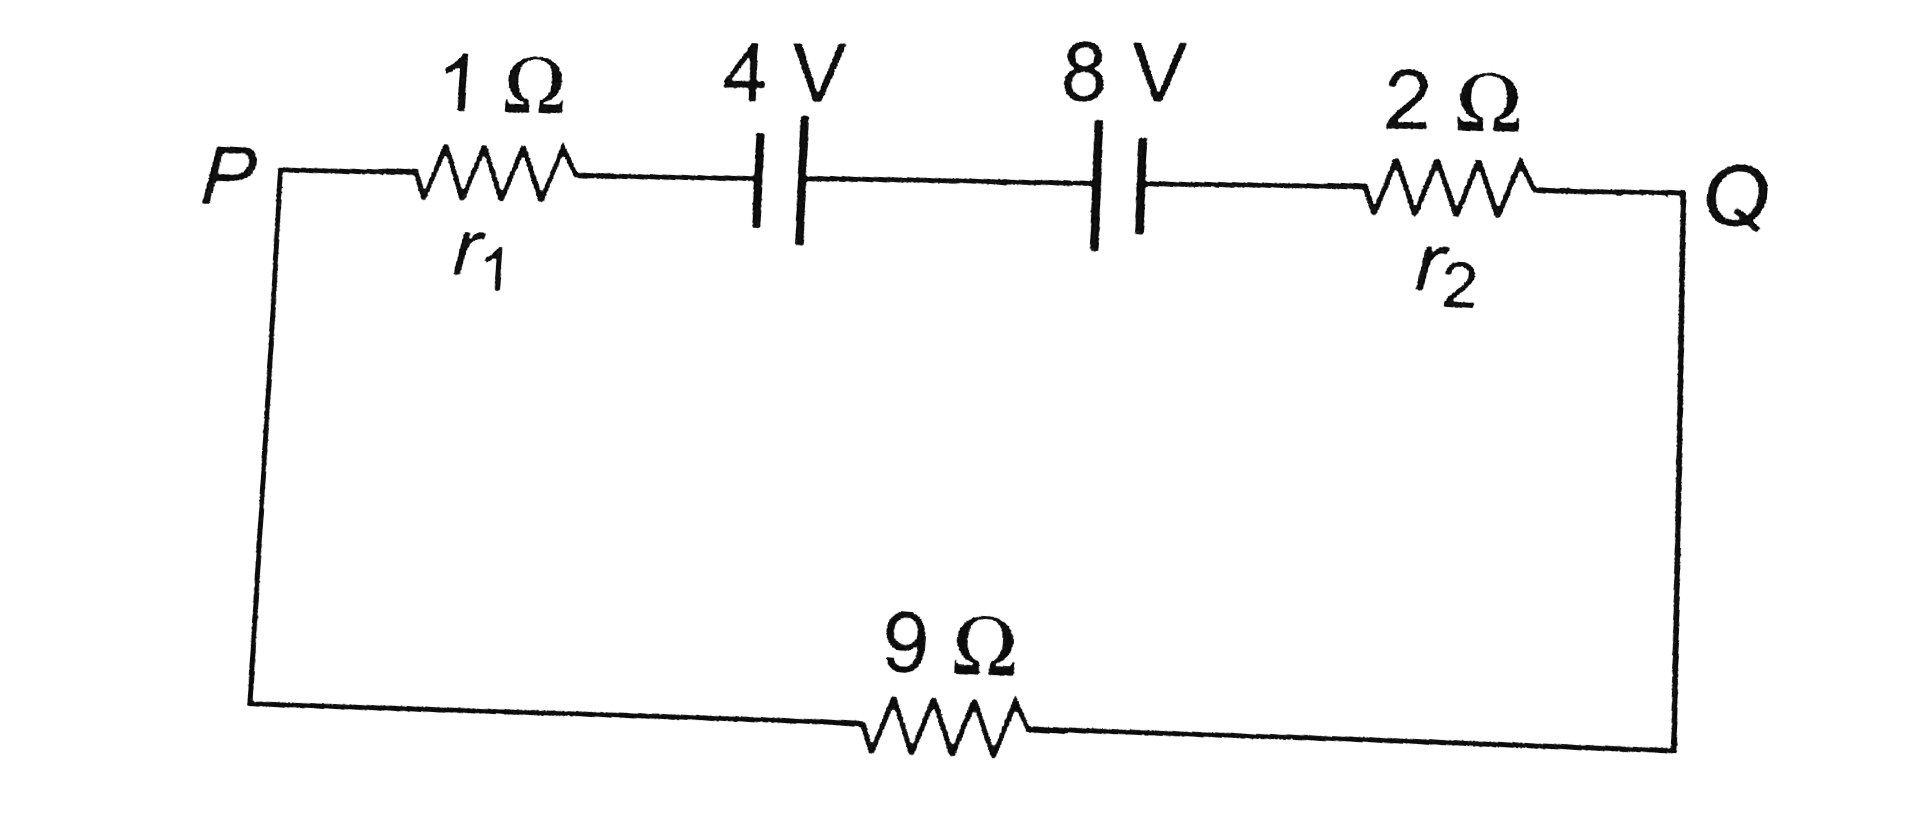 Two batteries of e.m.f. 4V and 8V with internal resistances 1 Omega and 2 Omega are connected in a circuit with a resistance of 9 Omega as shown in figure. The current and potential difference between the points P and Q